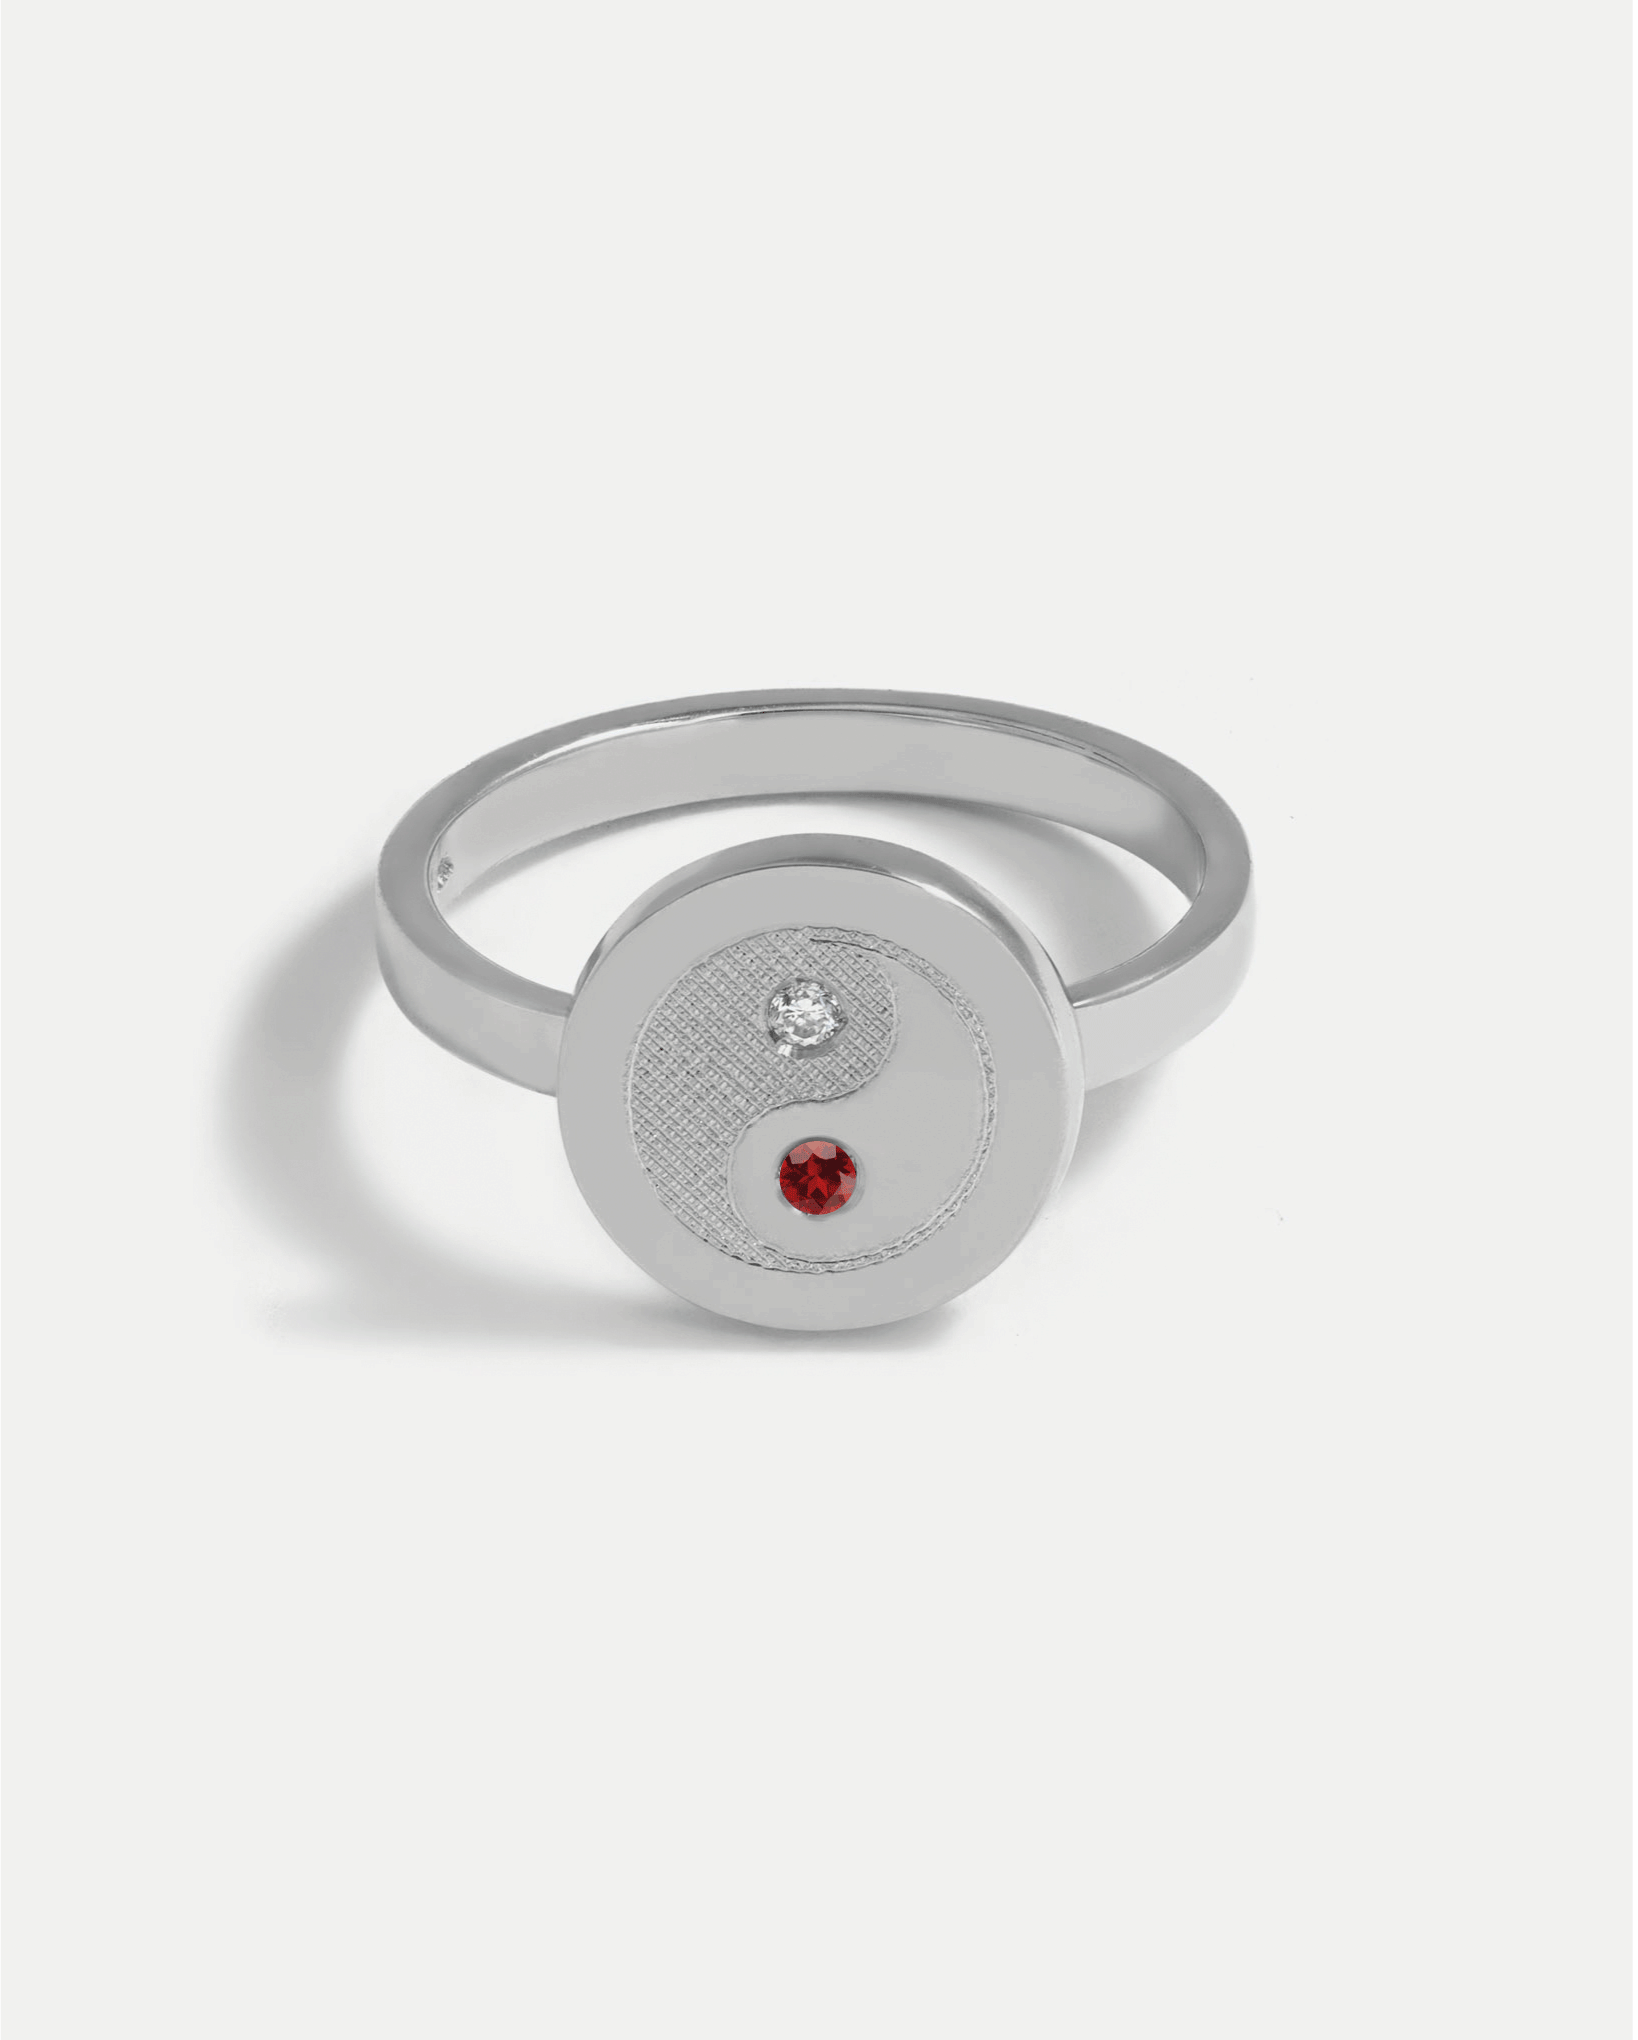 Yin & Yang Ring in Silver with lab grown Diamond and Anthill Garnet